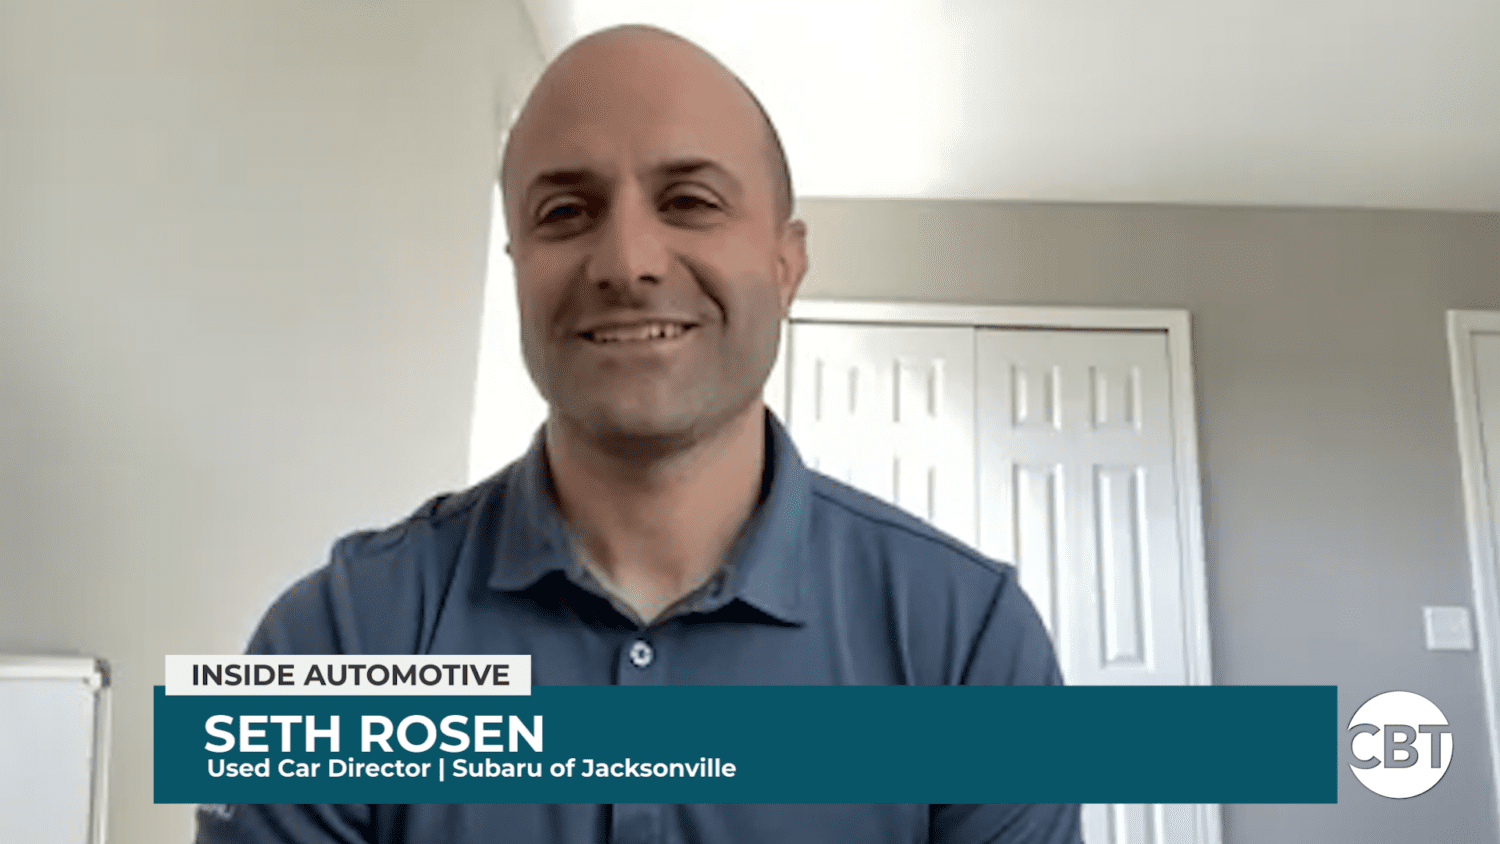 Seth Rosen joins Inside Automotive to discuss the latest demand and supply trends developing in the used vehicle market.